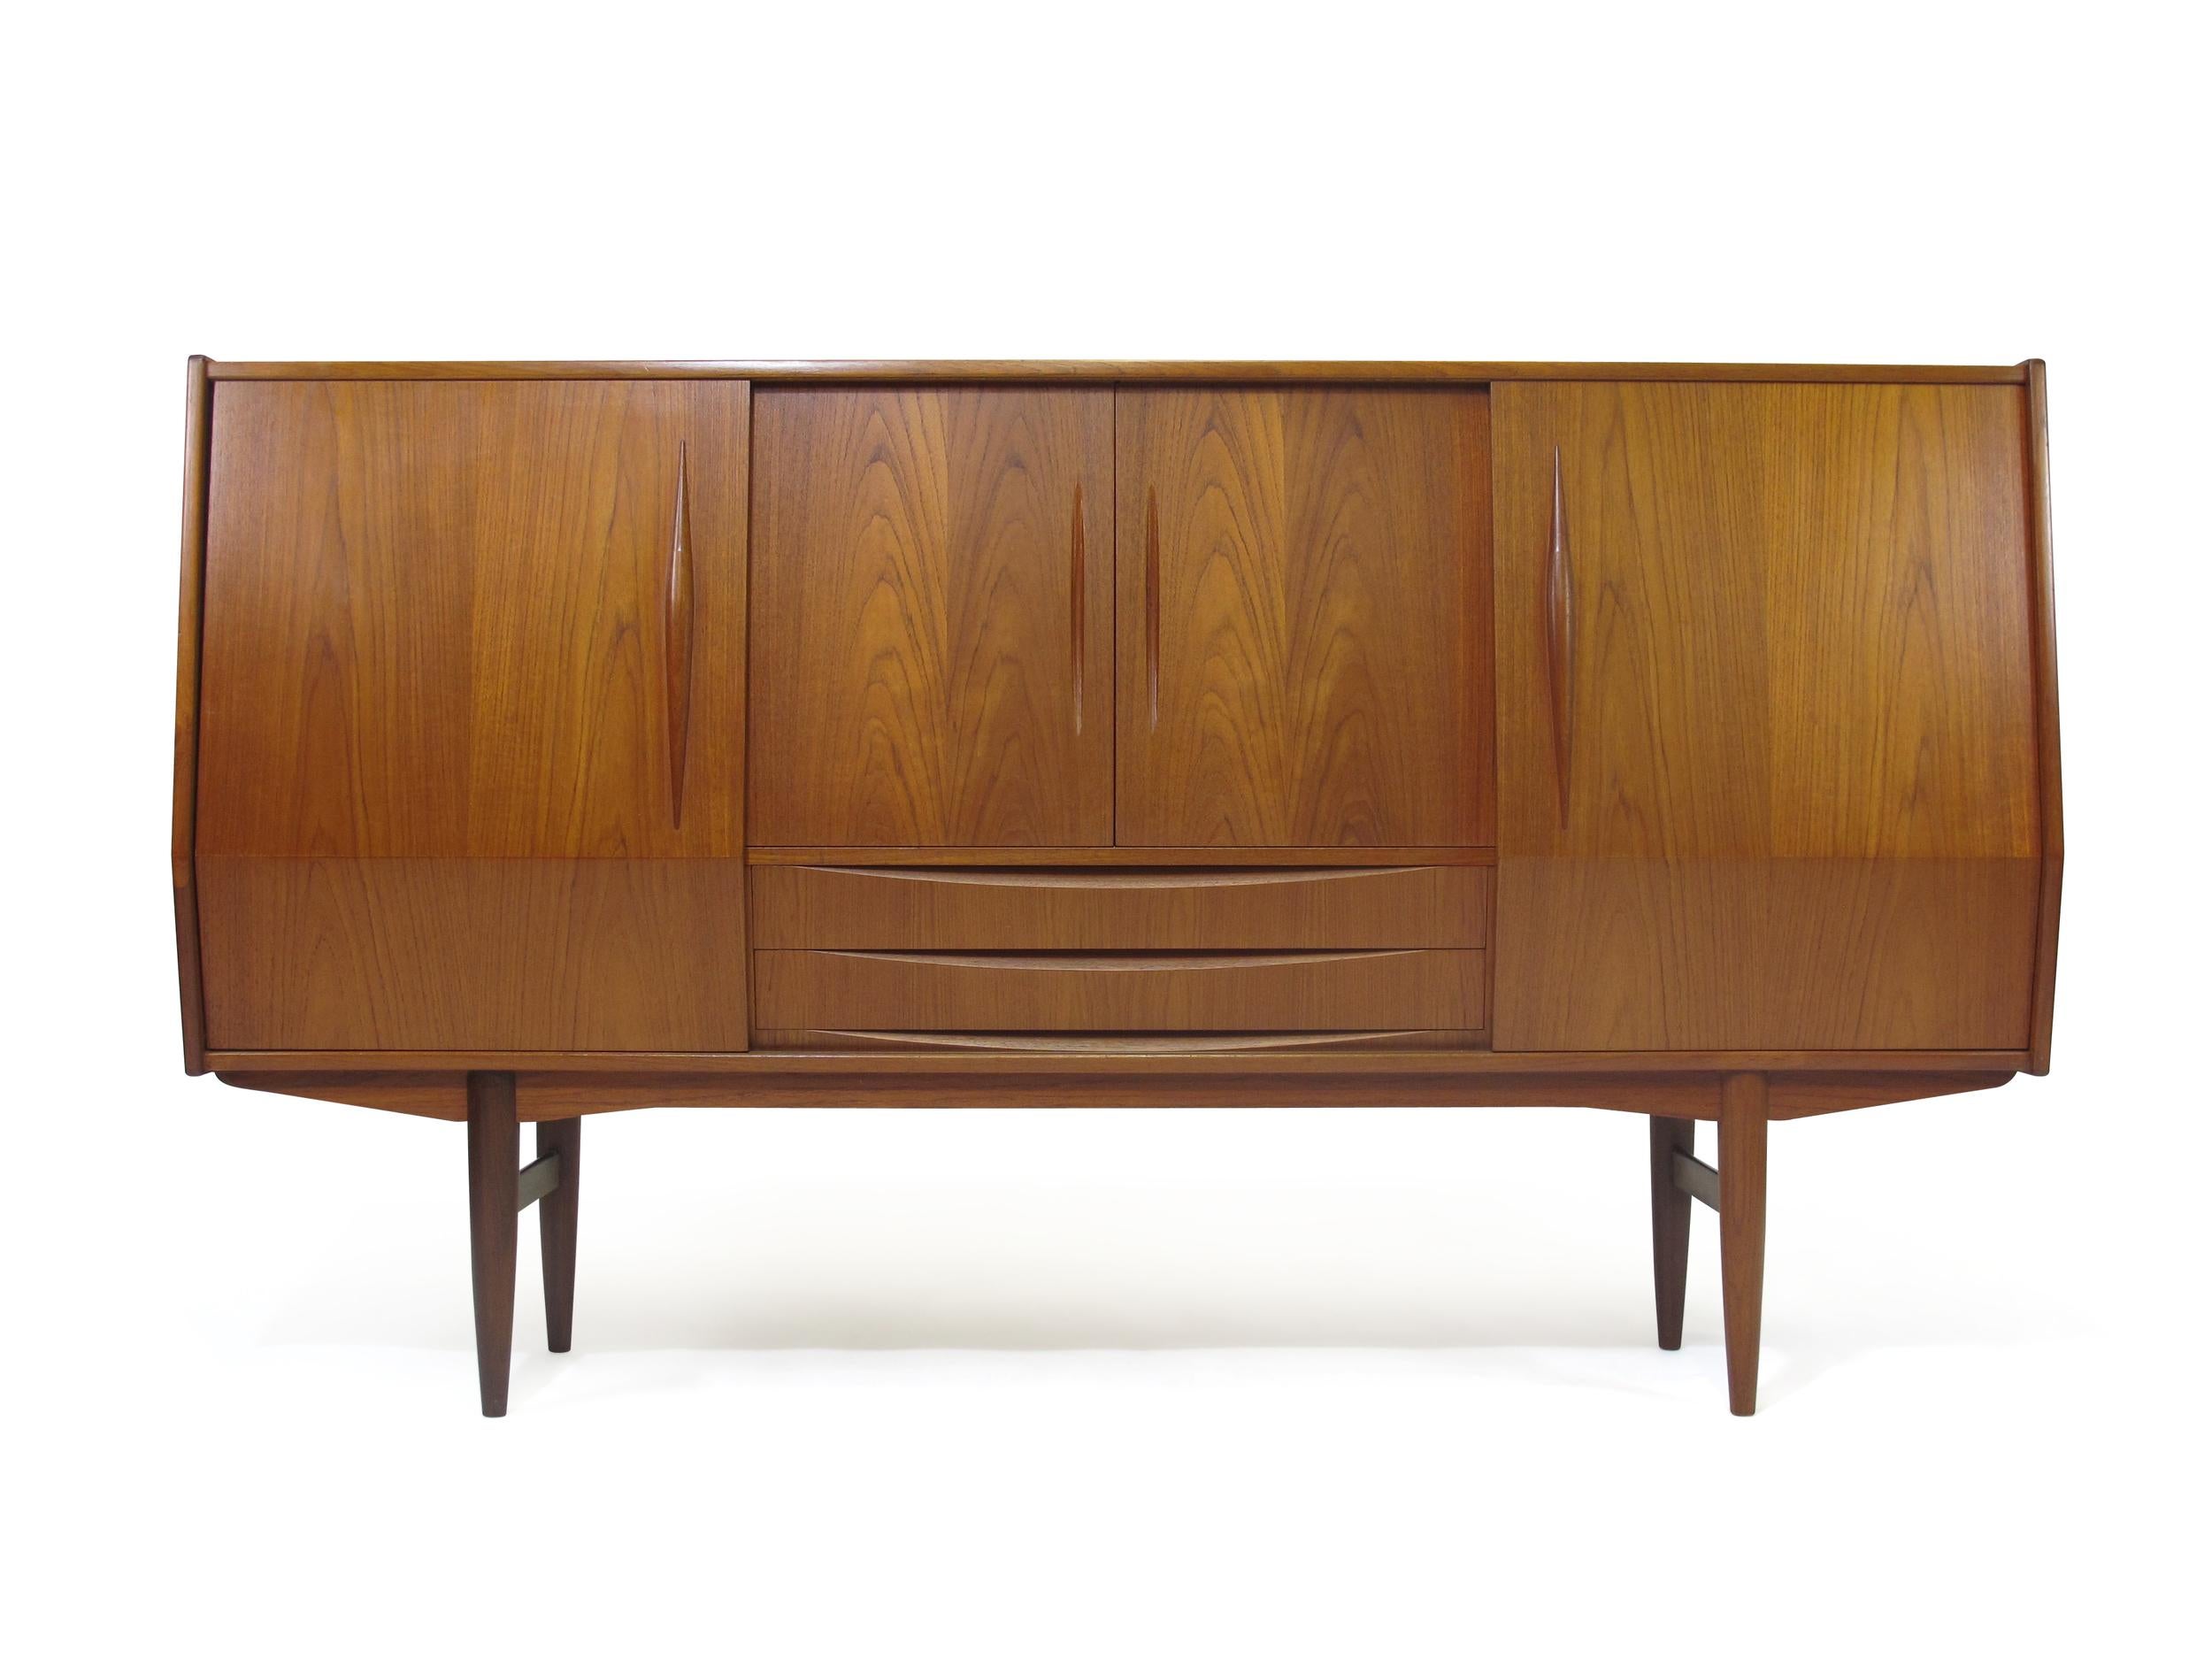 Scandinavian teak high sideboard cabinet with dramatic angled sliding doors. Interior consists of adjustable shelves and a mirrored back bar in rosewood with felt lined silverware drawers. Cabinet has been lightly cleaned and oiled and in very good,